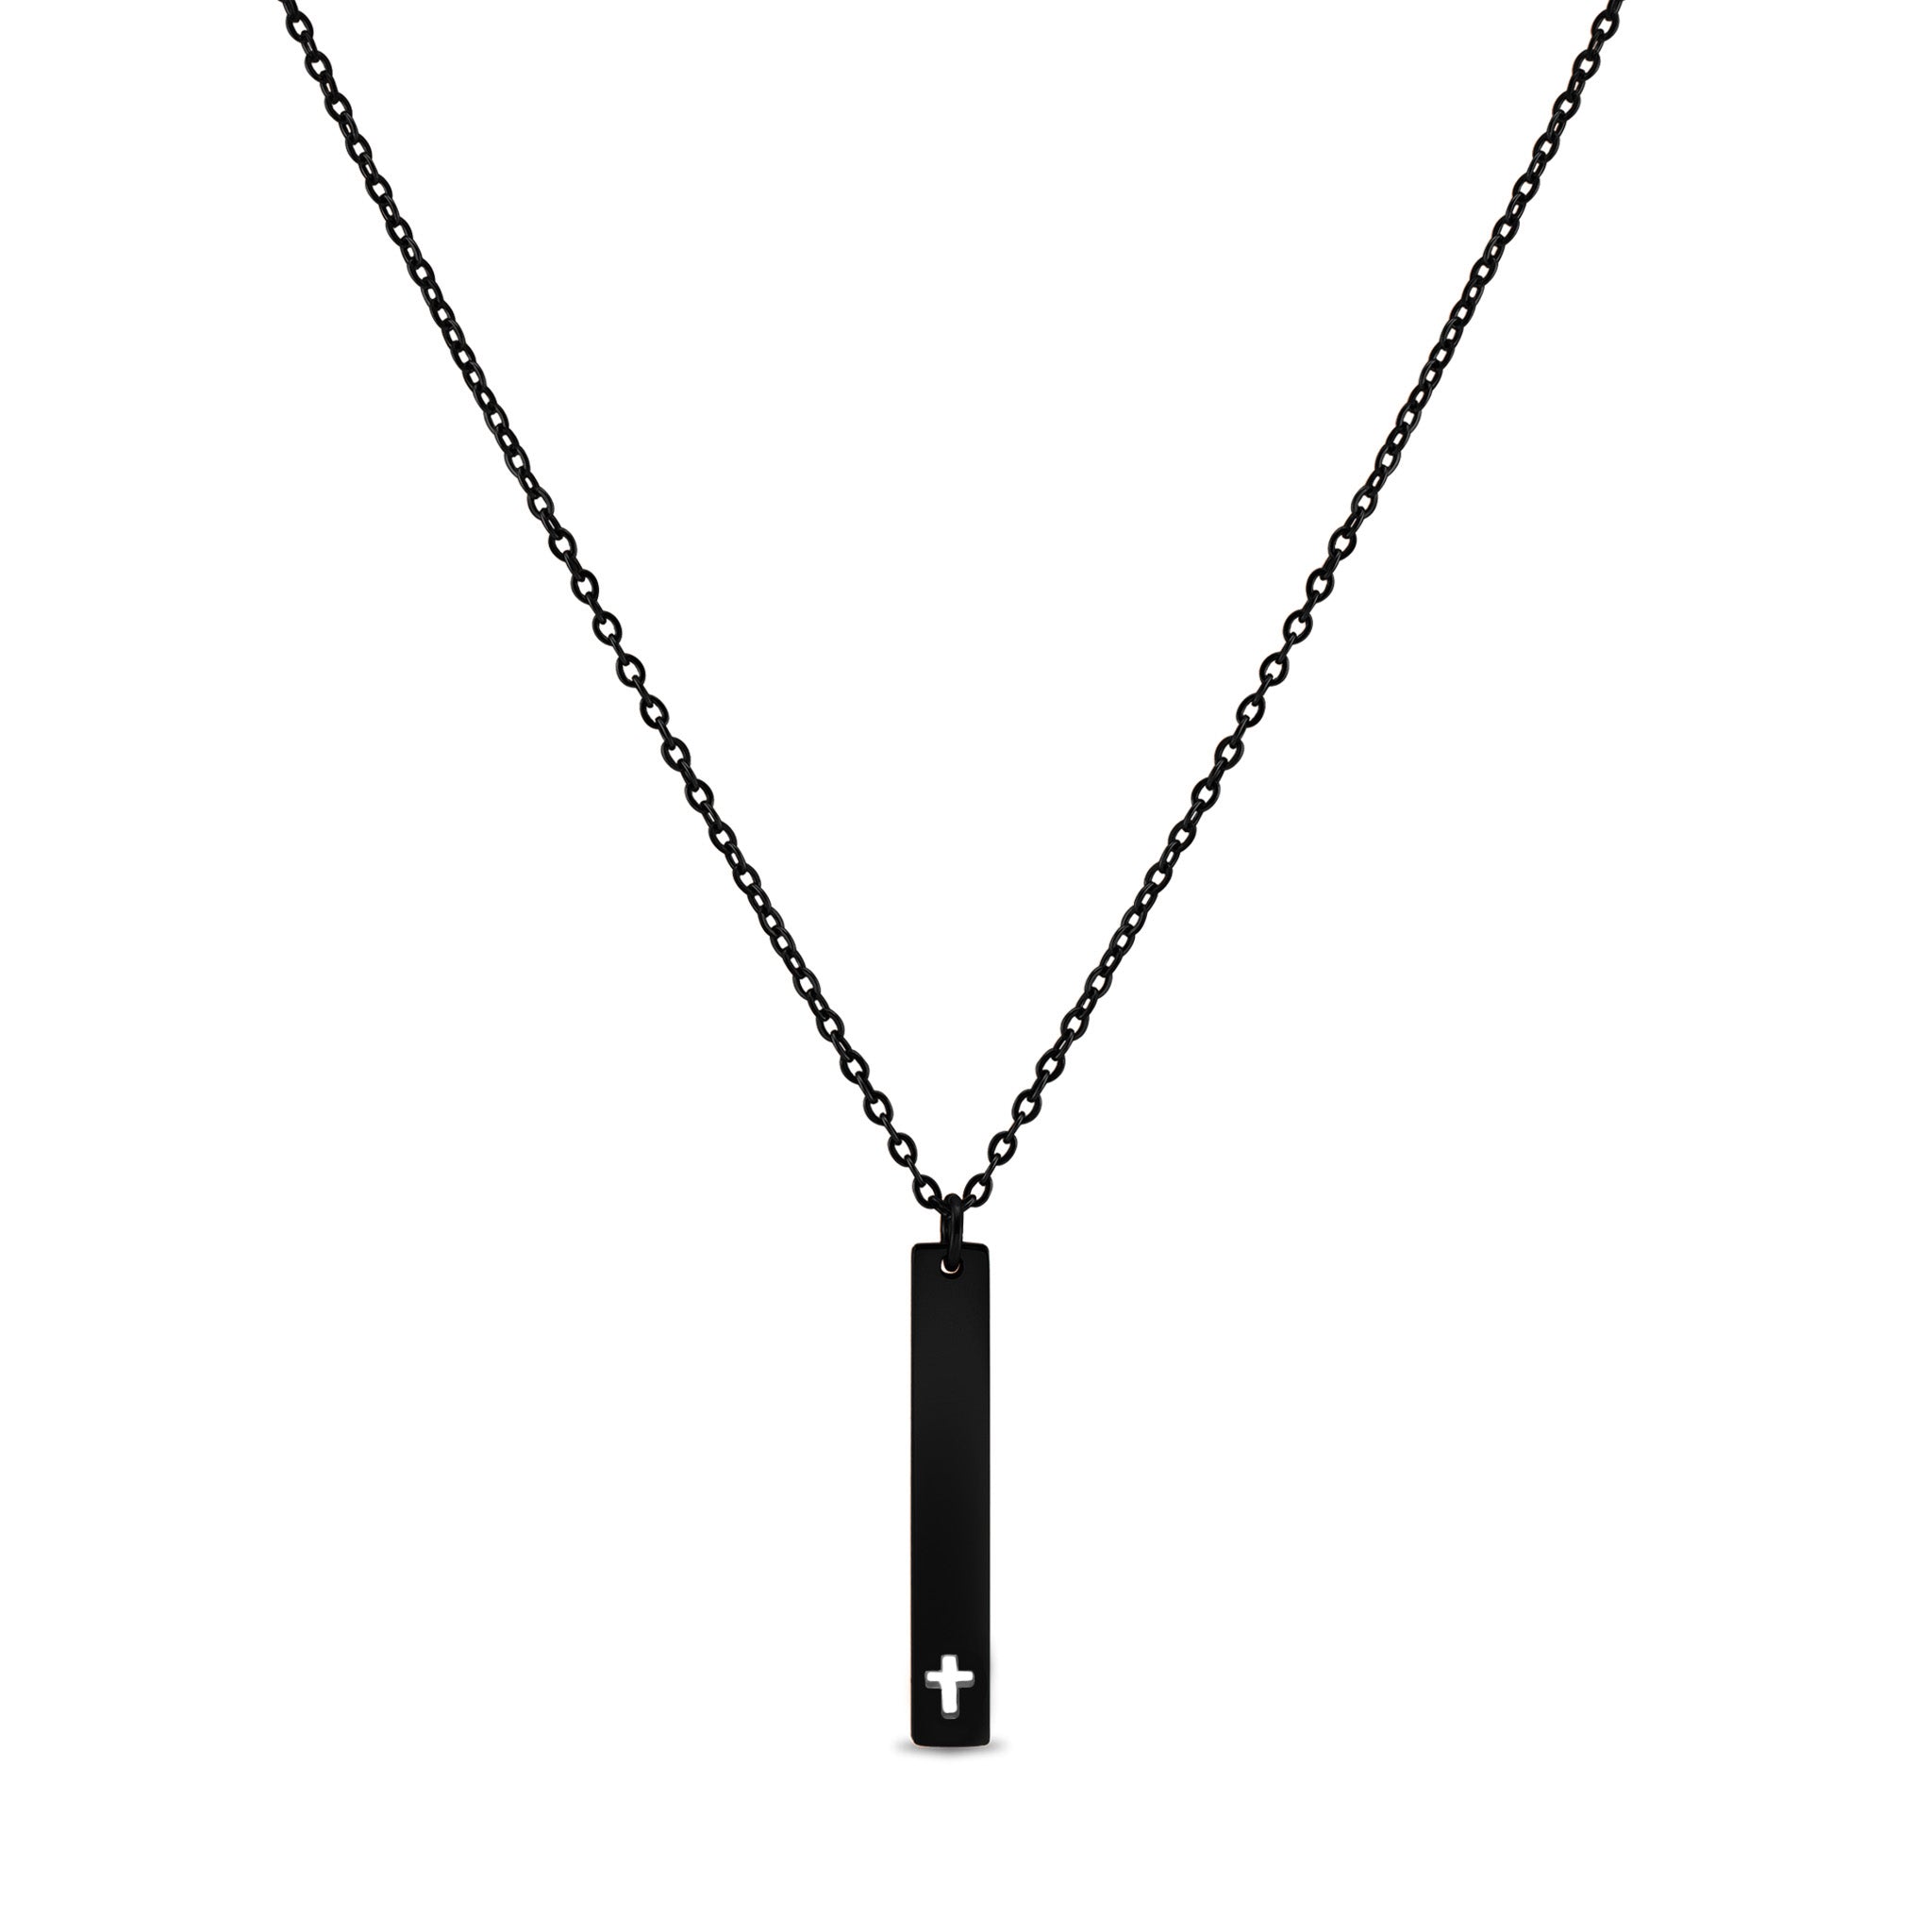 ElegantSilver Plated Black Chain Stainless Steel Curb Bar Pendant Necklace  - Fashion Frill